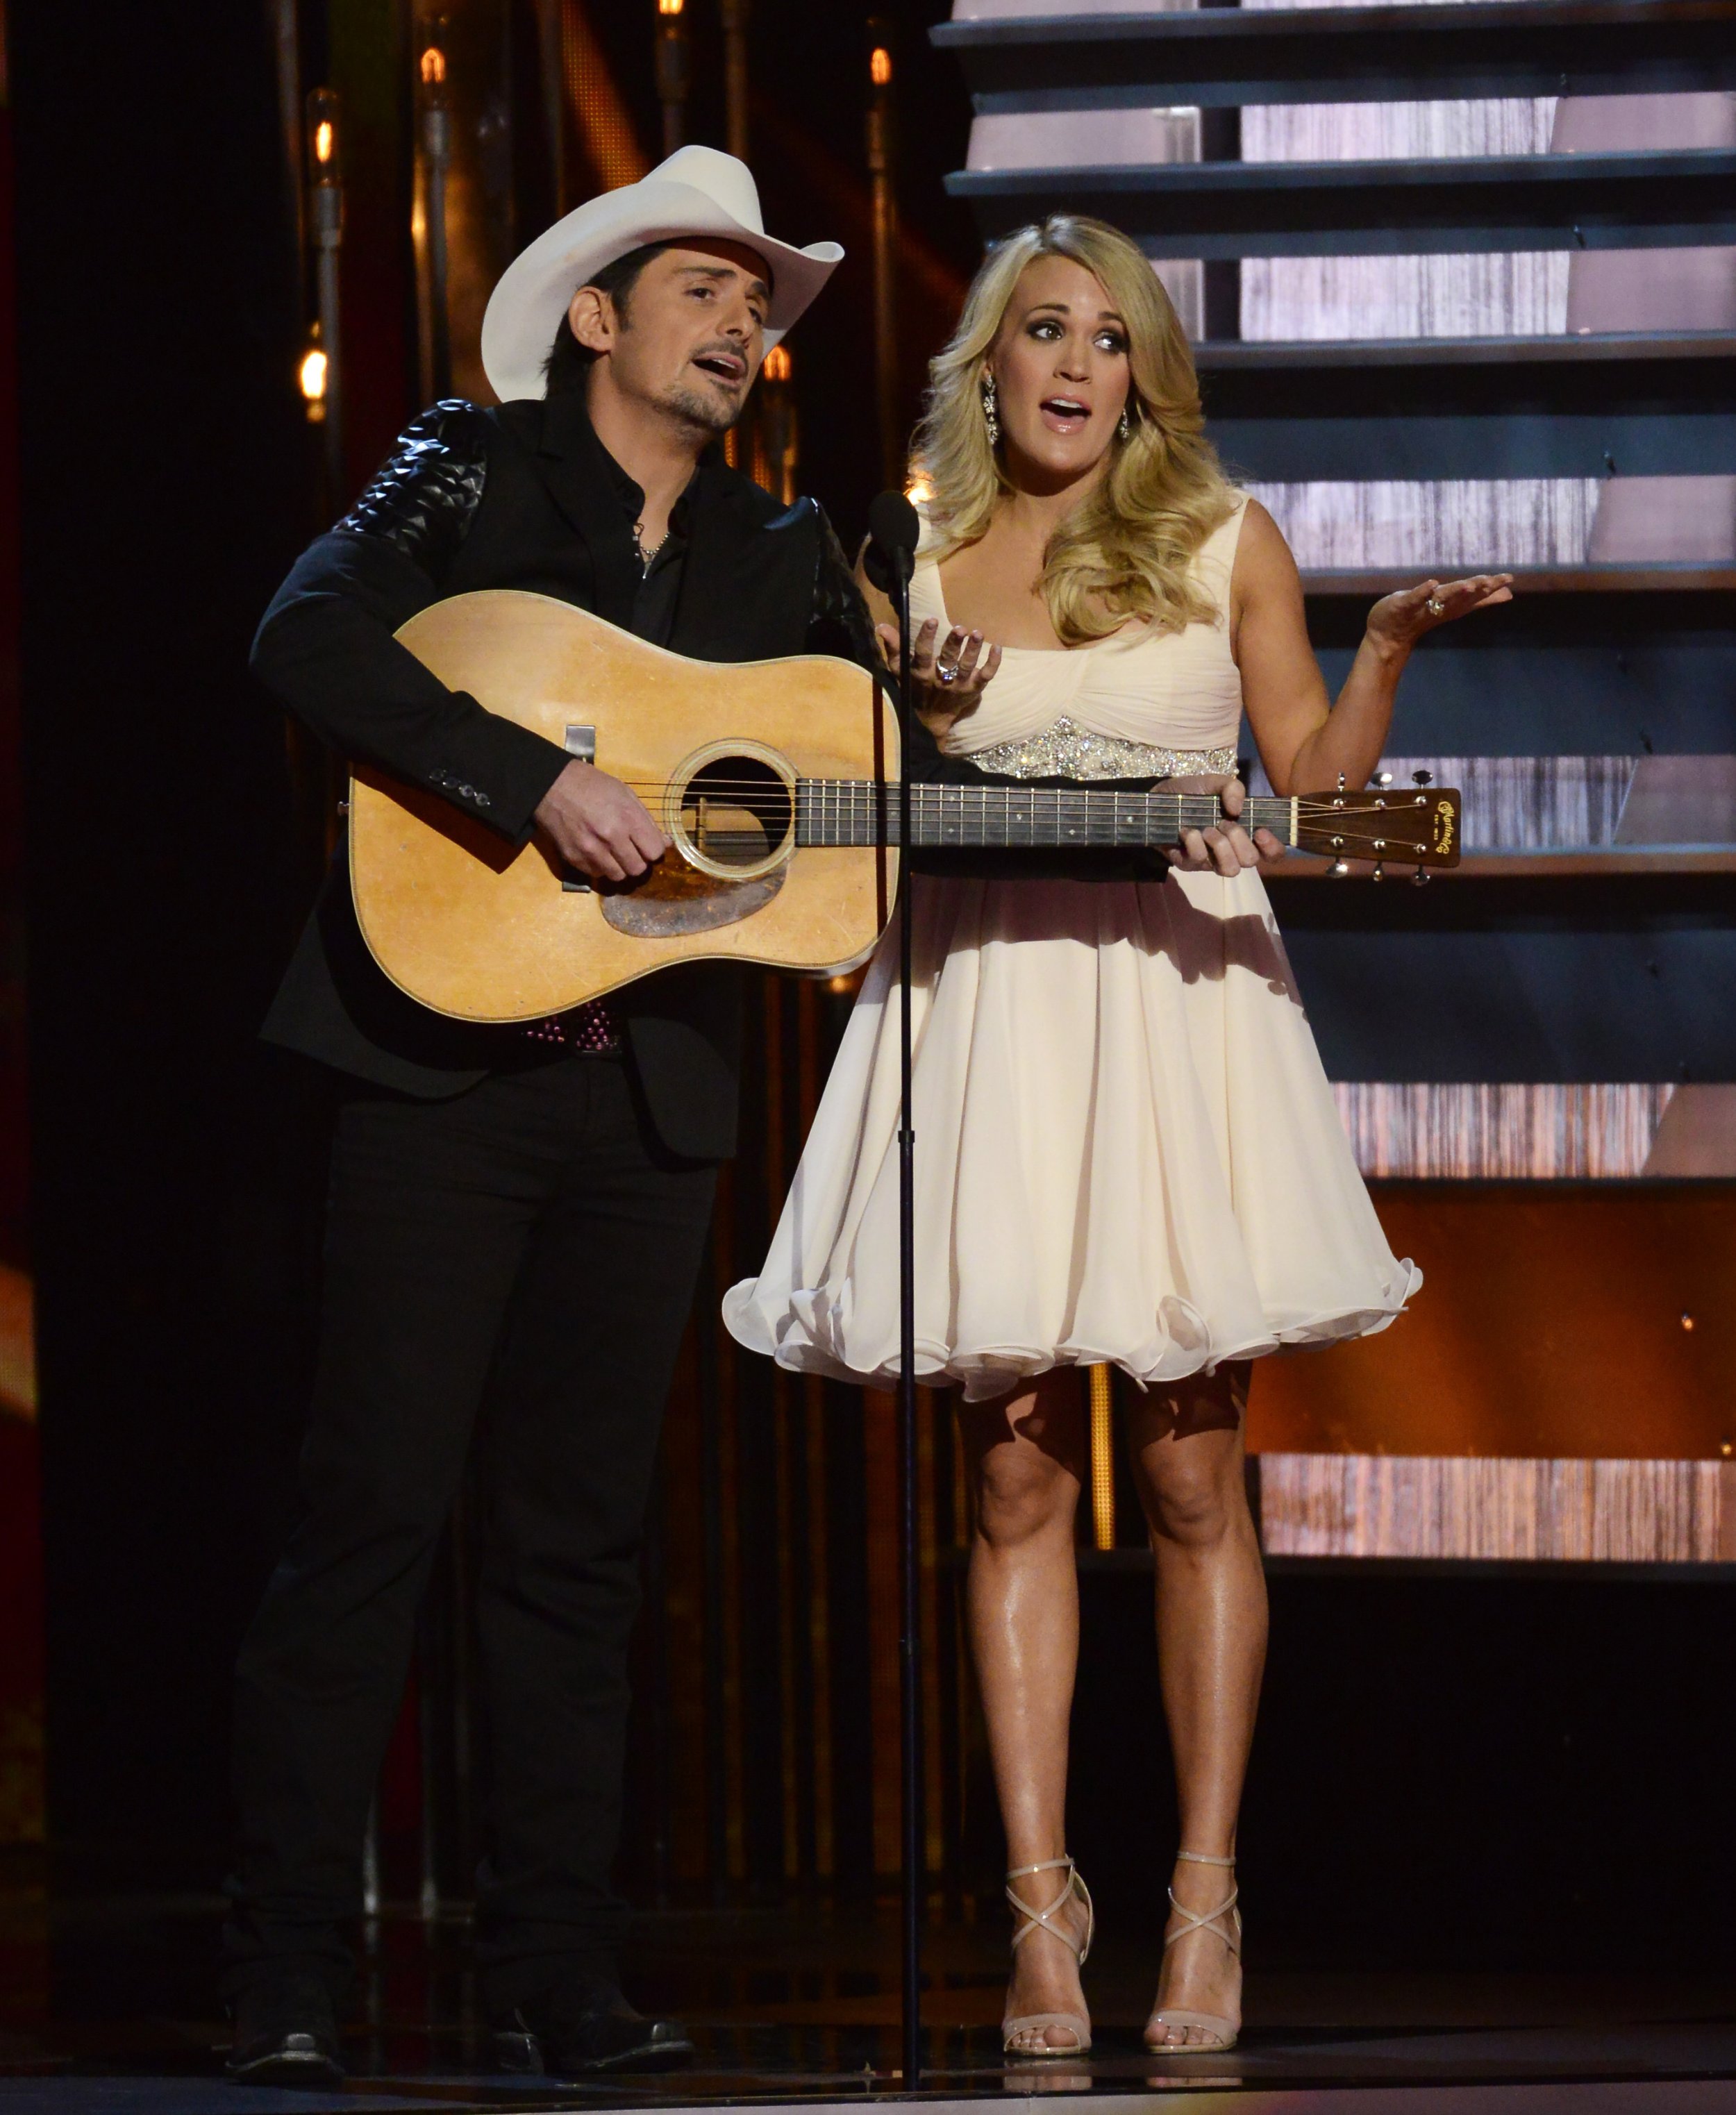 PHOTOS: Who Is Hotter? CMA Babes Carrie Underwood And Taylor Swift